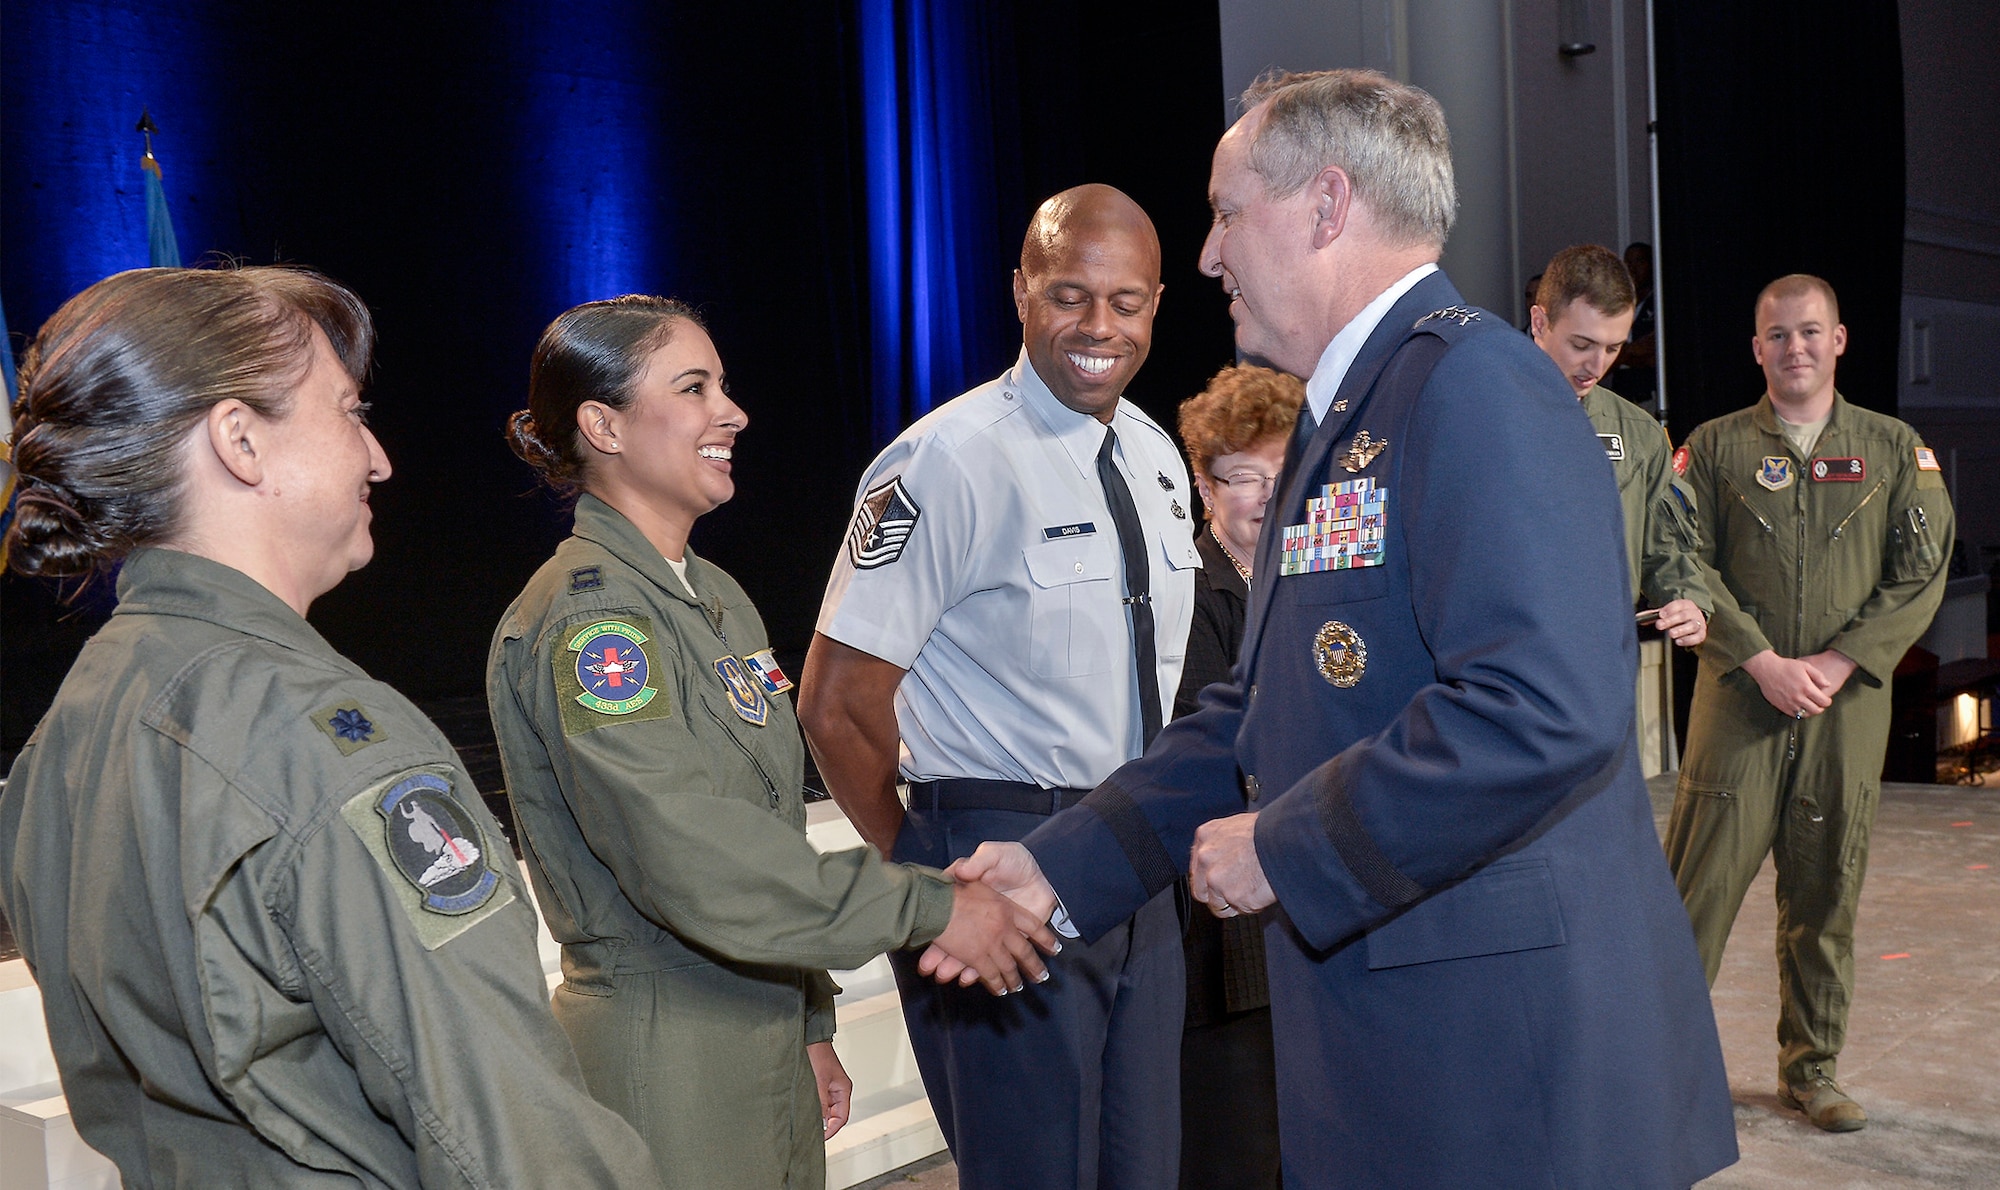 Air Force Chief of Staff Gen. Mark A. Welsh III shakes hands with Airmen who he highlighted during his Air Force Update keynote address during the Air Force Association's 2013 Air & Space Conference and Technology Exposition Sept. 17, 2013, in Washington, D.C. During his address, Welsh emphasized how each Airman contributes to Global Vigilance, Global Reach and Global Power for America. (U.S. Air Force photo/Michael J. Pausic) 